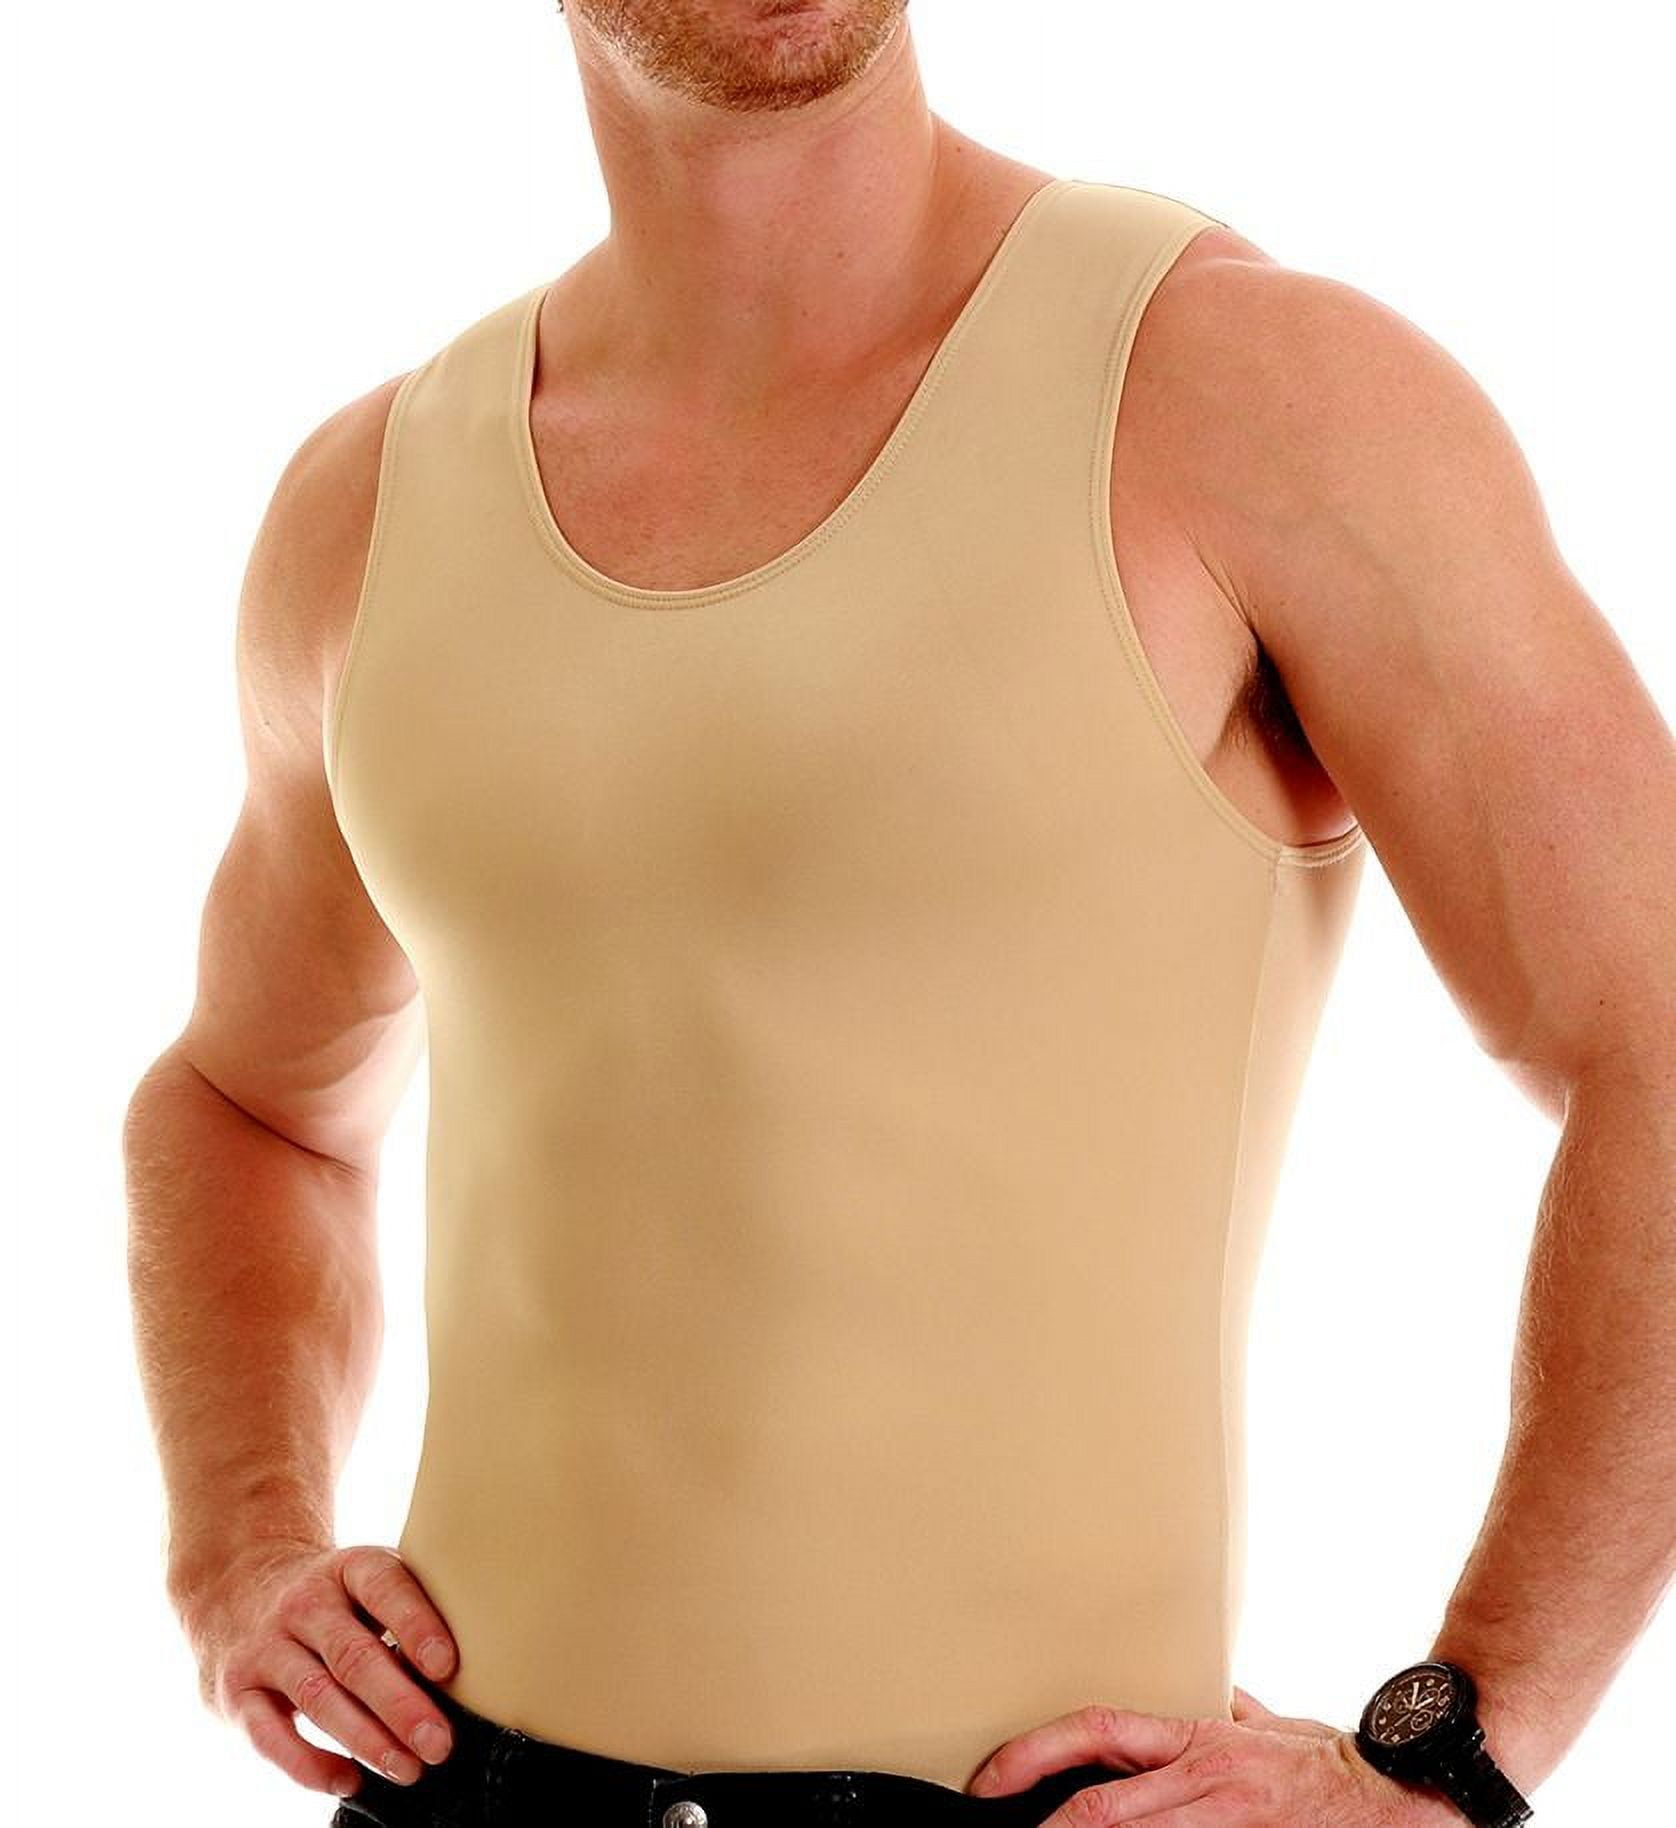 Extreme Fit Men's Core Support and Insta Trim Shapewear Gynecomastia  Compression Tank Top Undershirt, Orange, Large at Tractor Supply Co.